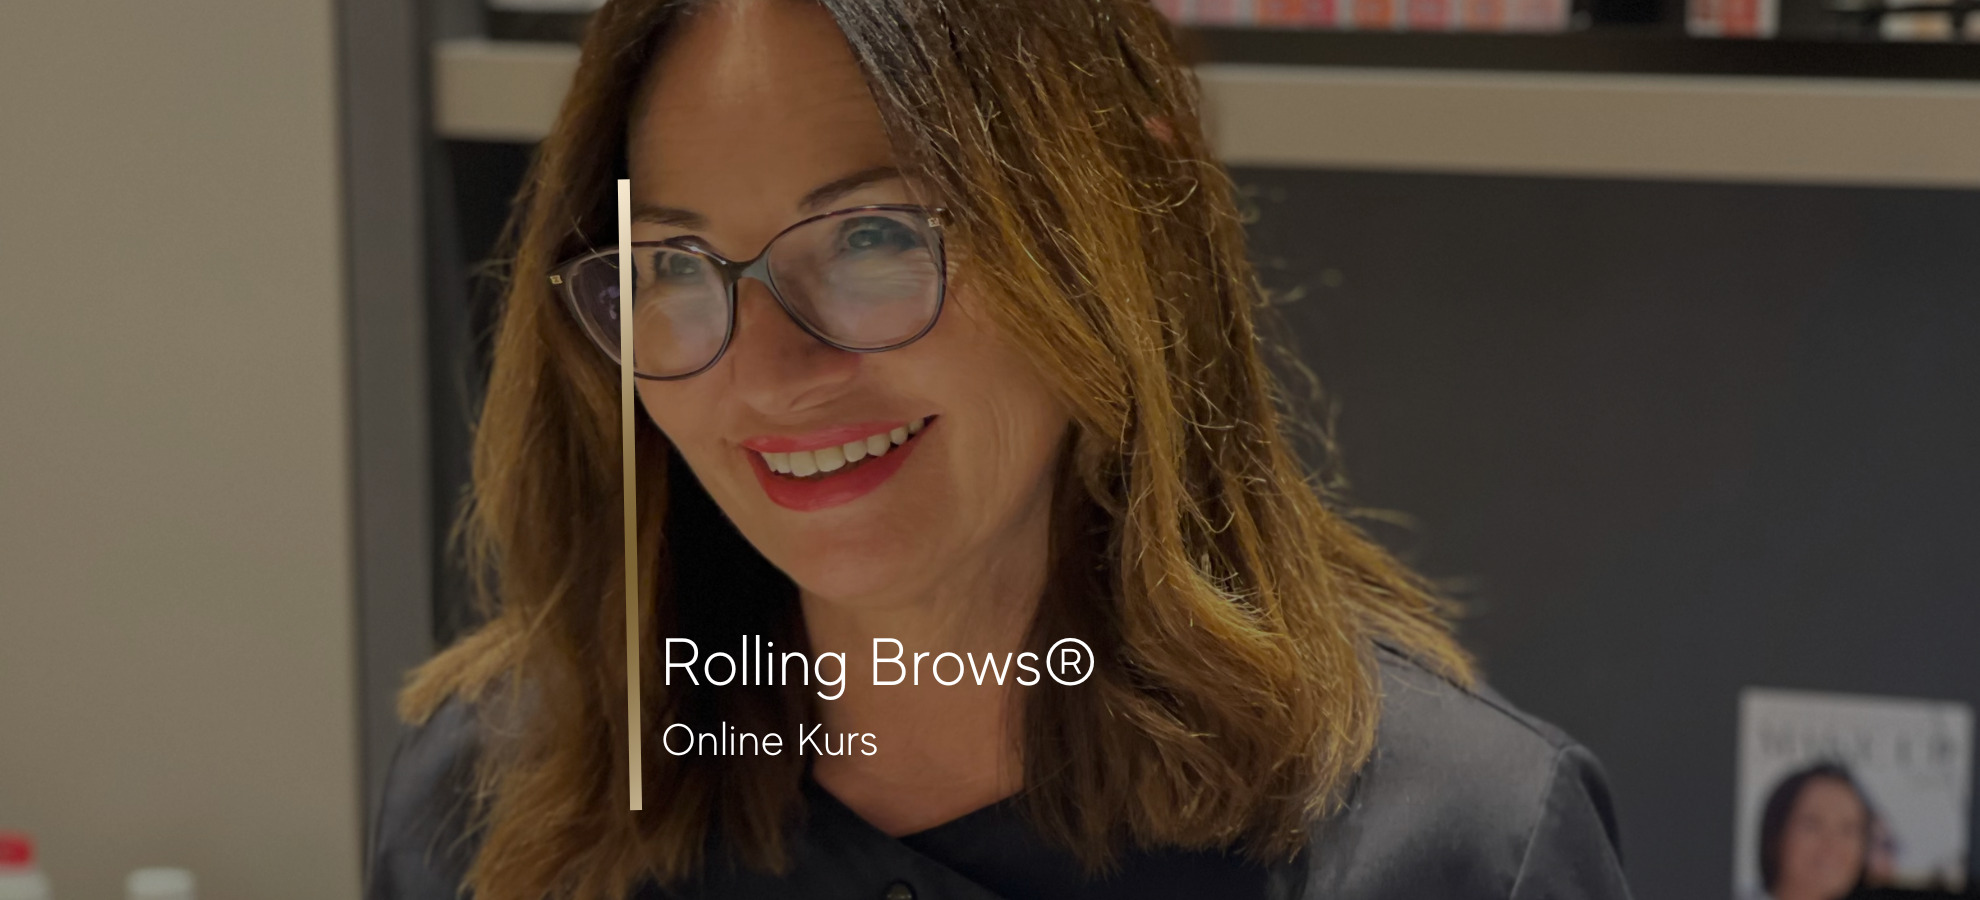 Rolling Brows Online Kurs für Rolling Brows Basic